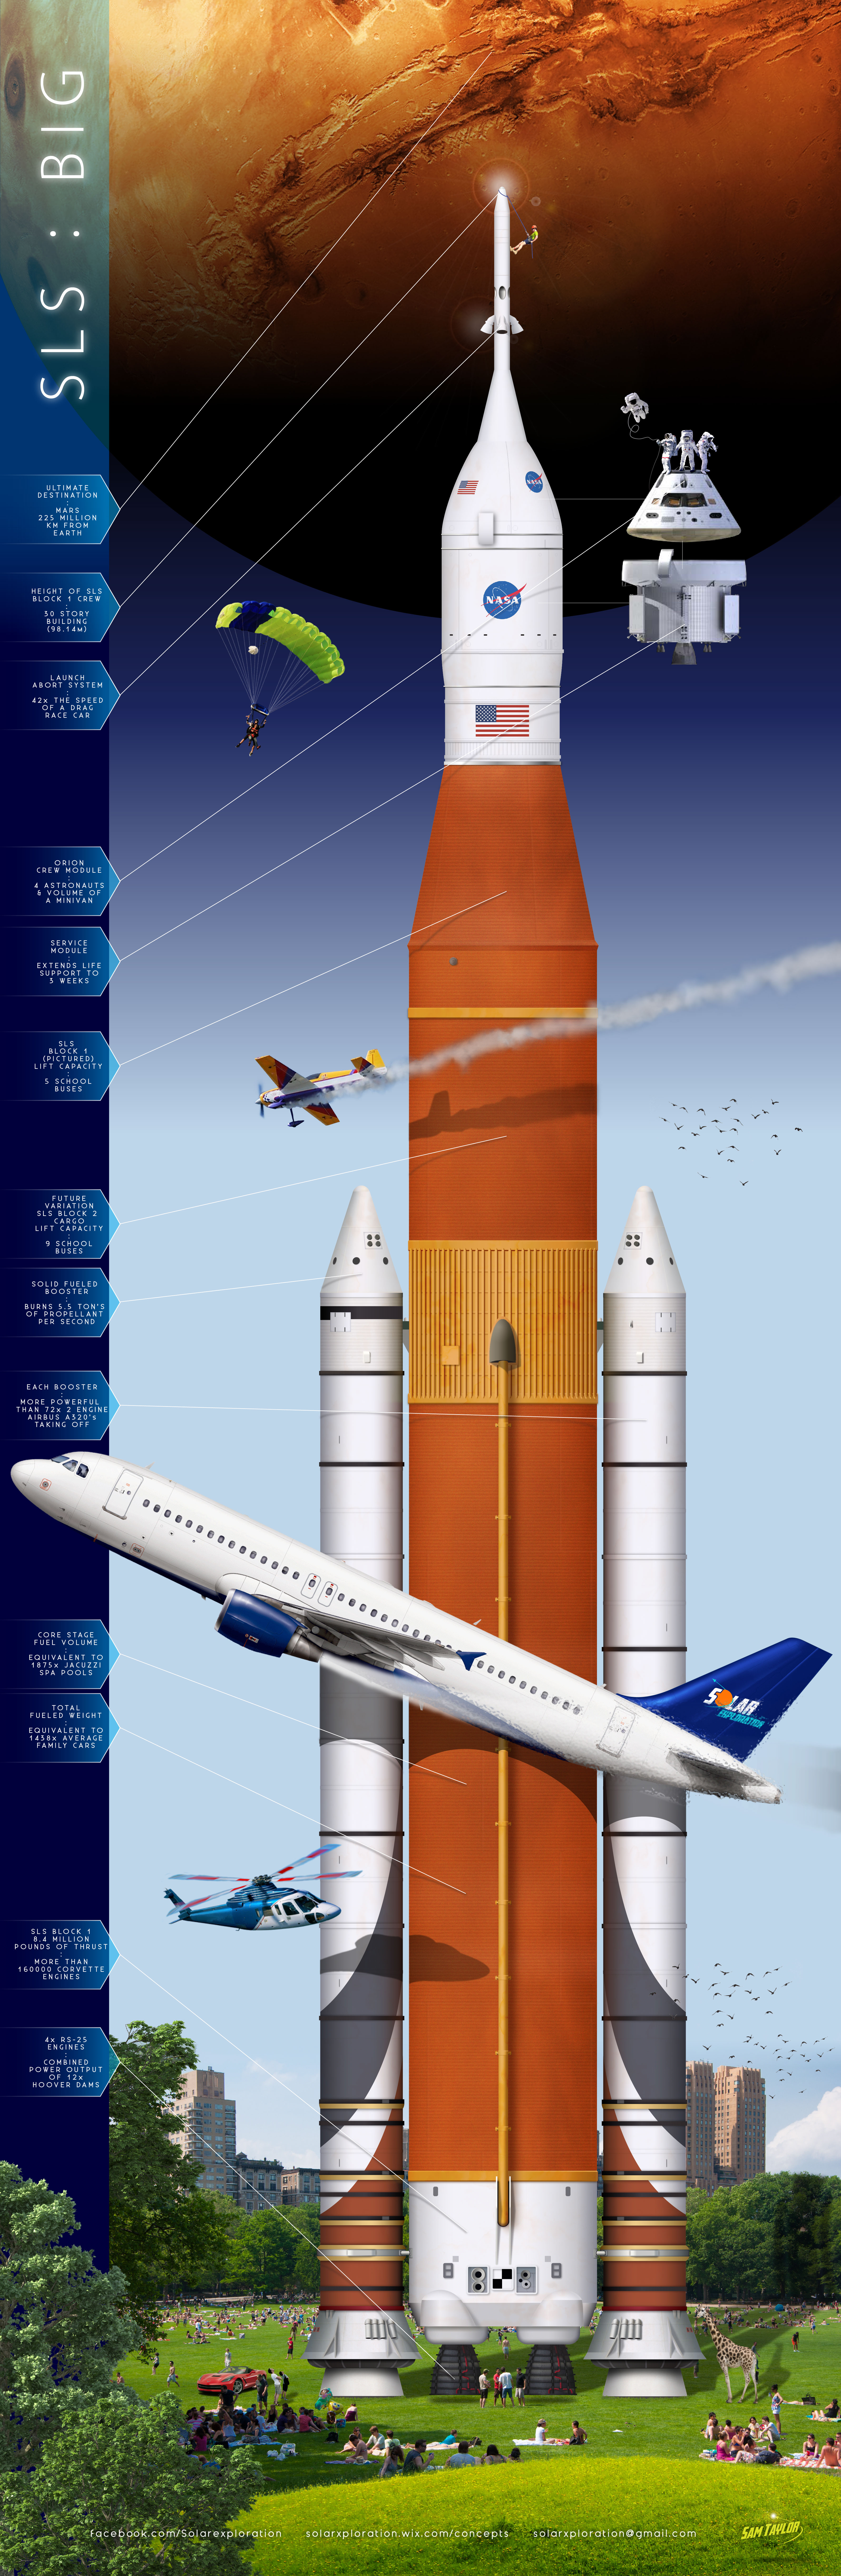 S L S (Space Launch System) :  B I G | This Infographic features the new Space Launch System, presented in a fun and interesting way that shows the awesome power and size of the rocket to scale - directly alongside everyday objects and information that most people will be able to relate to. | NASA/JPL-Caltech